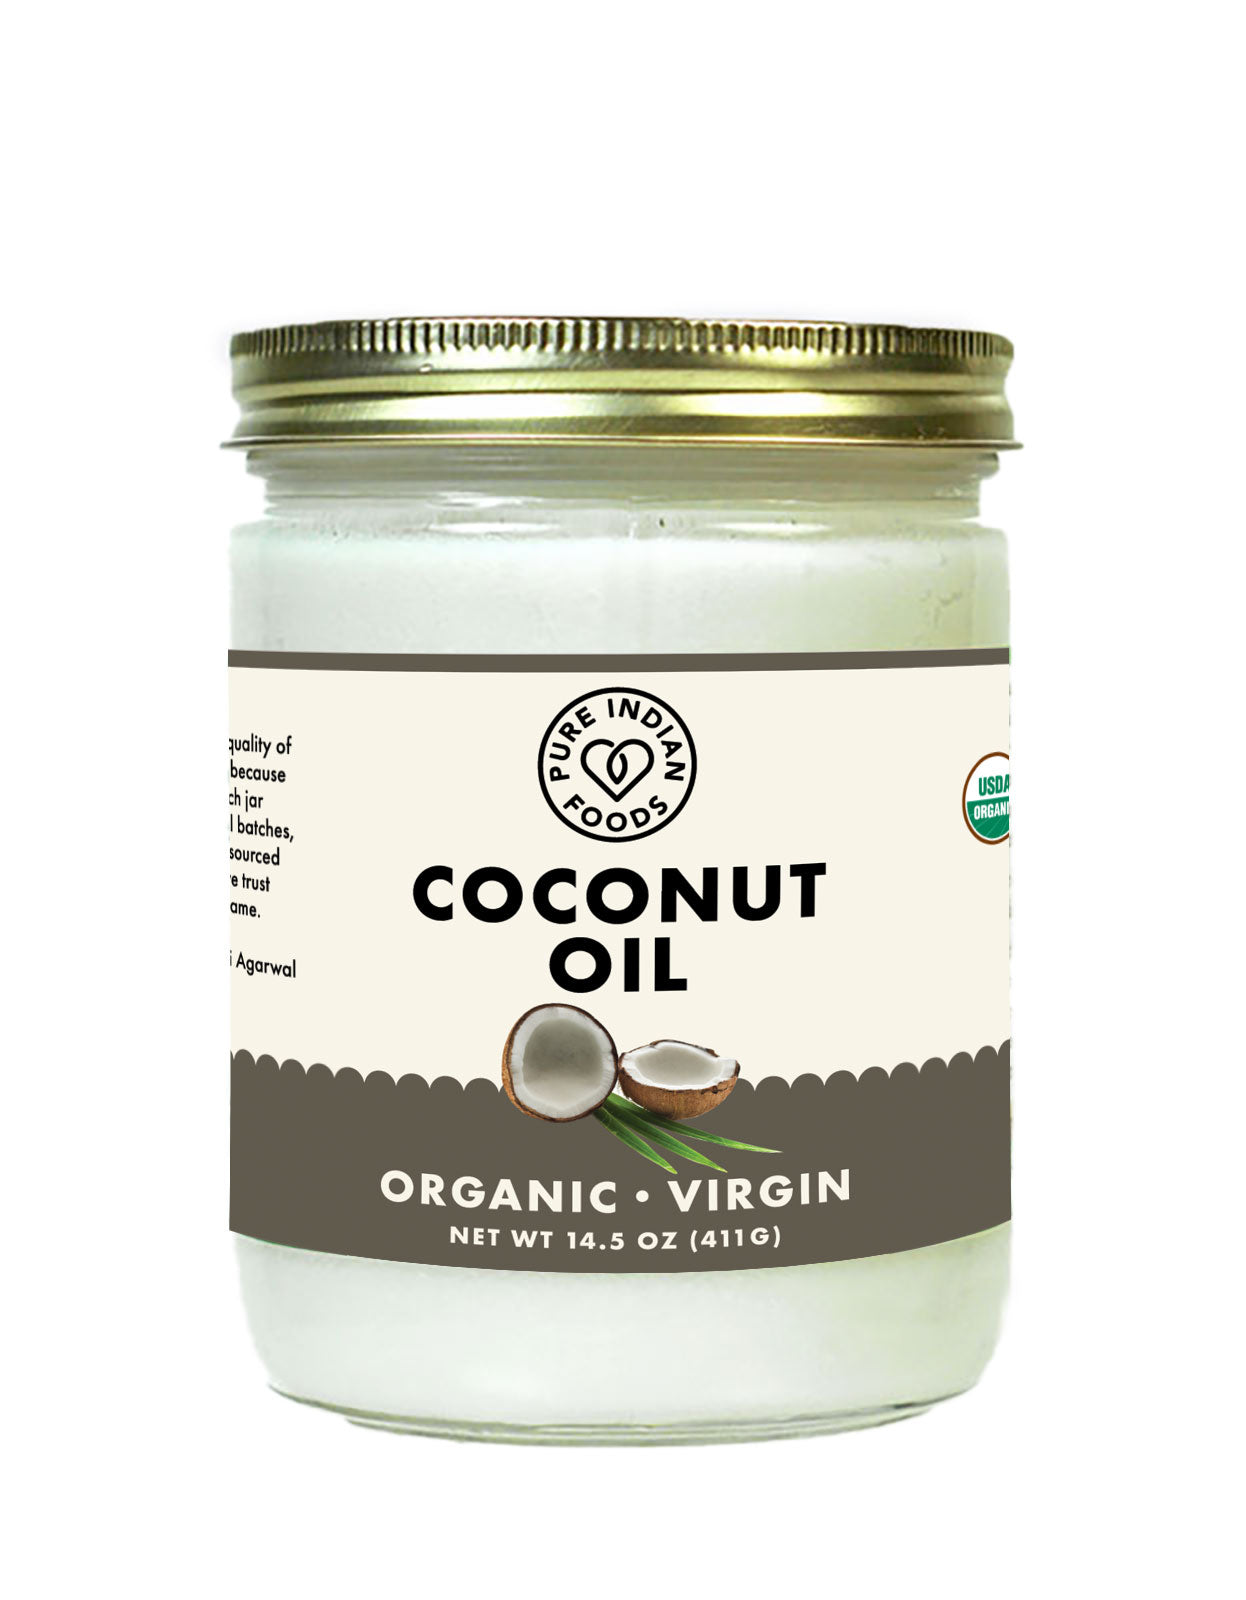 1 jar of Pure Indian Foods Organic Coconut Oil.